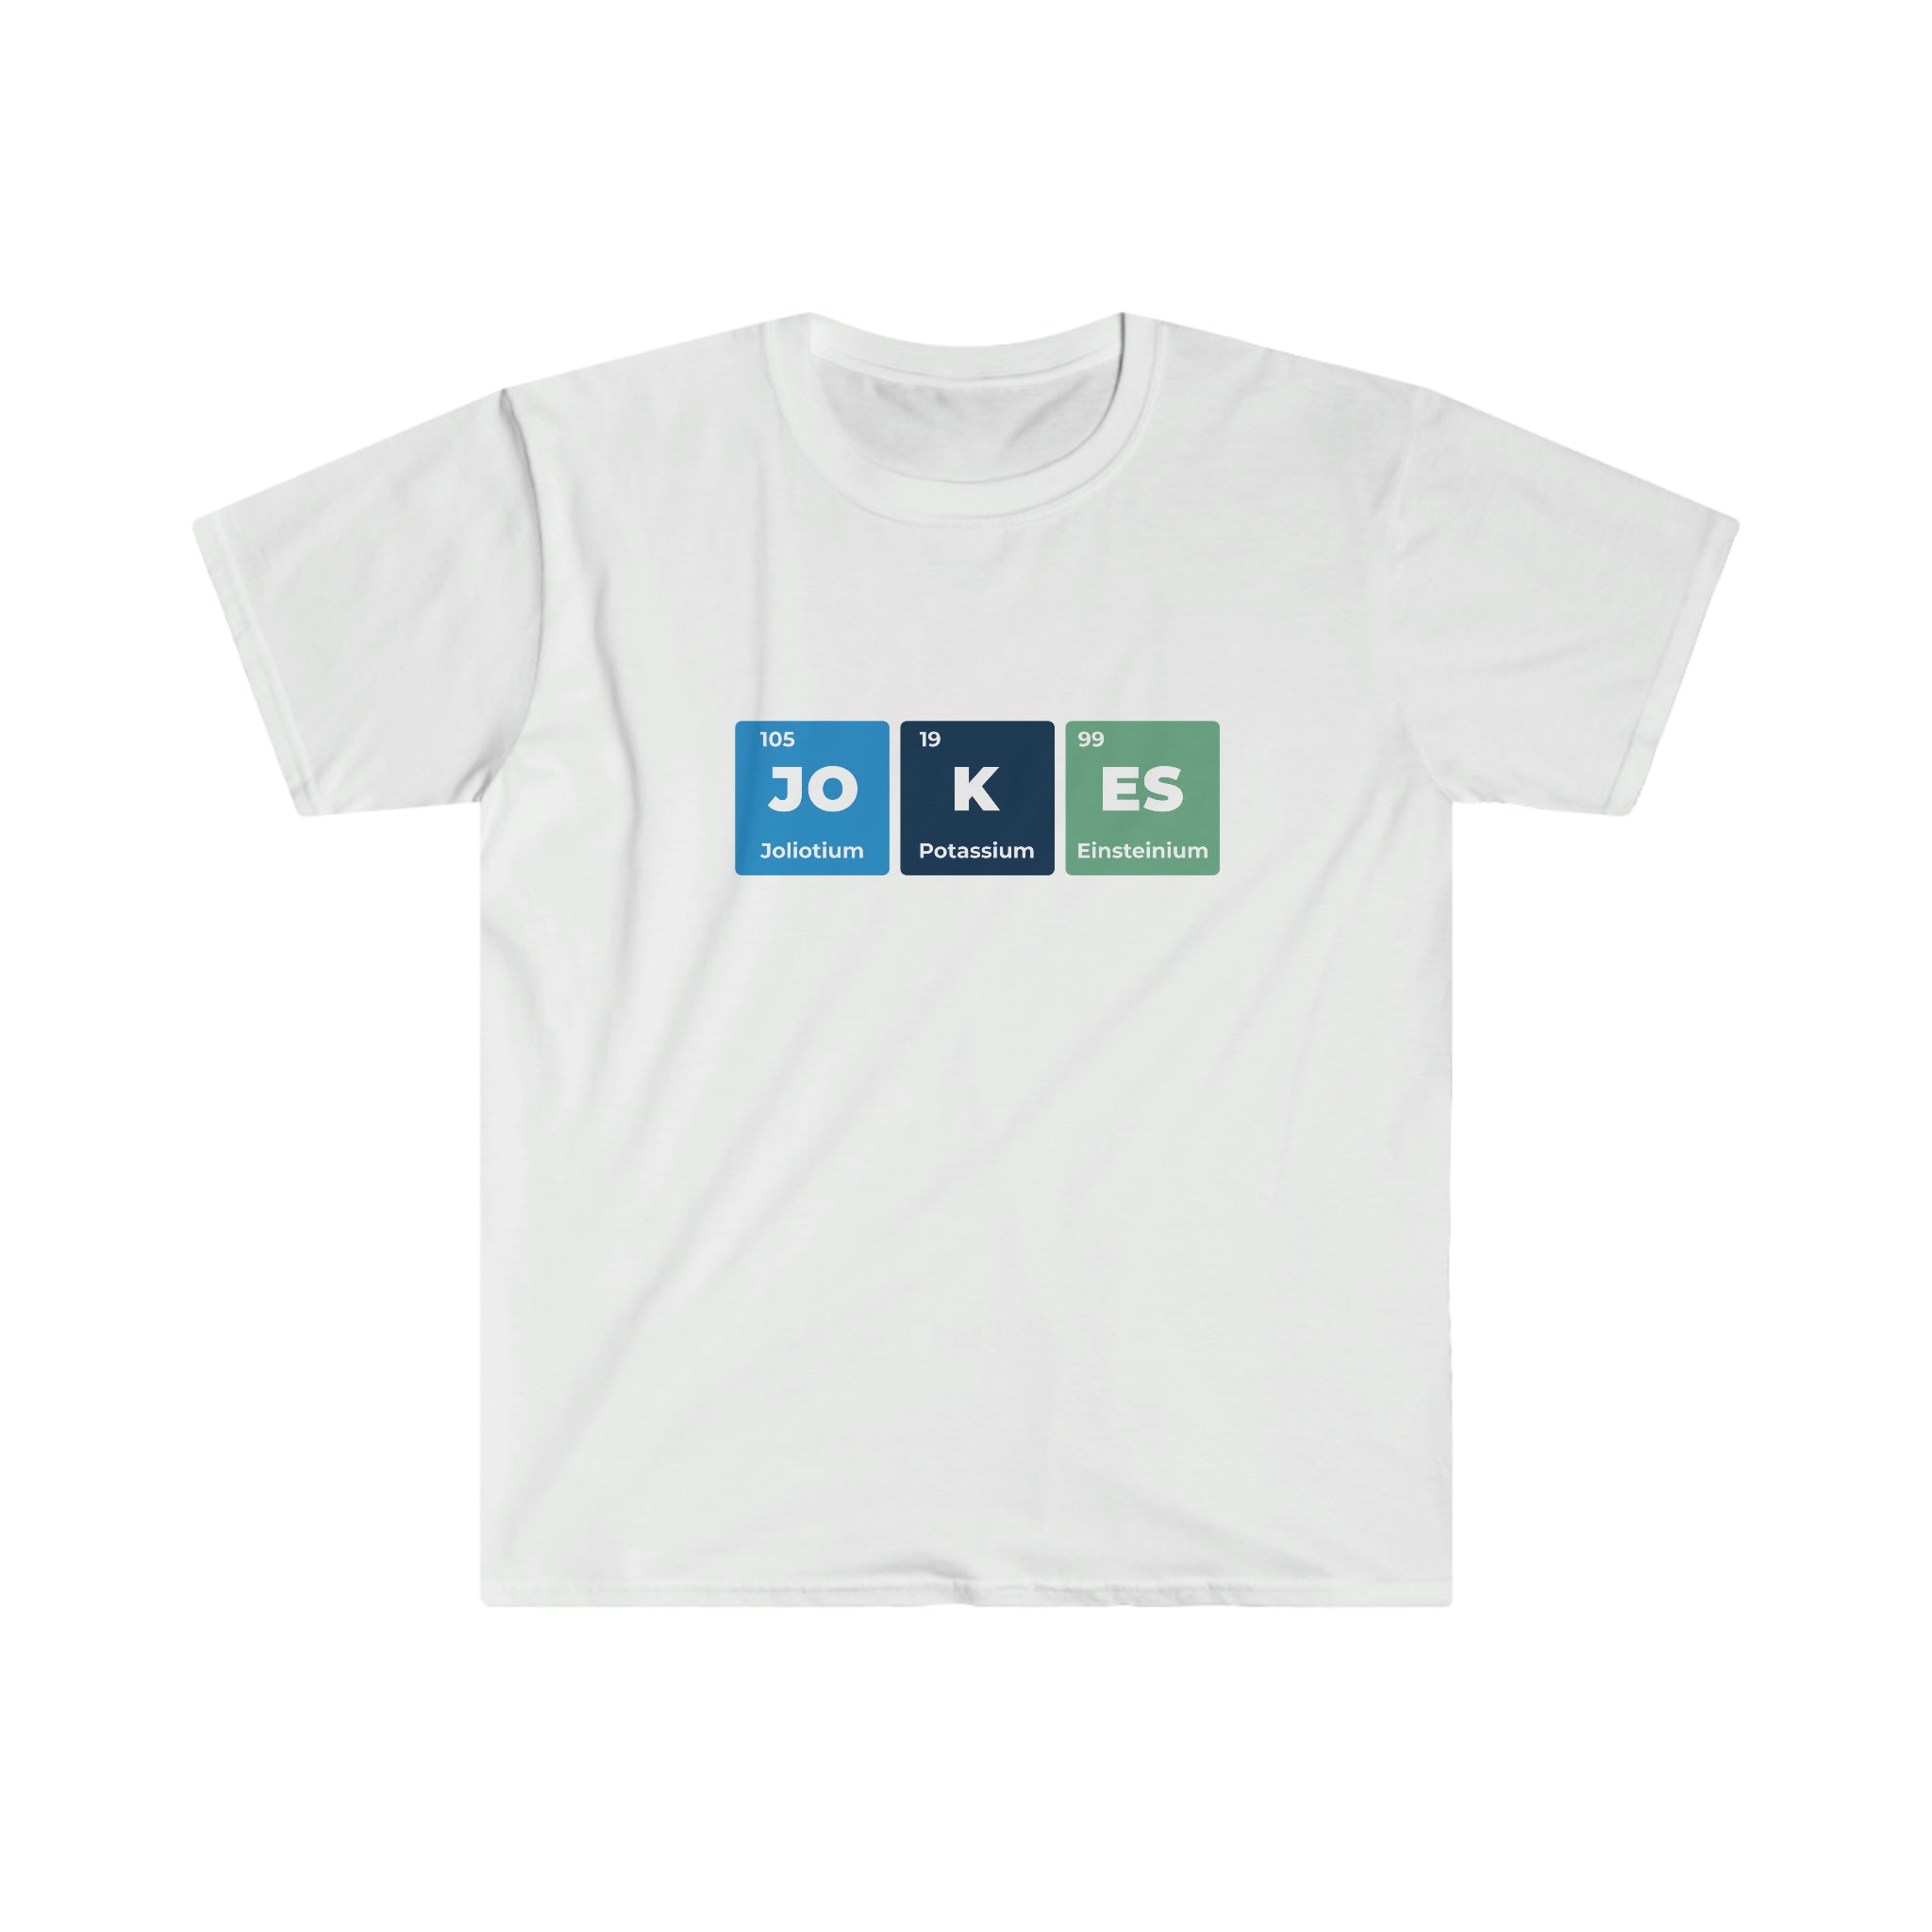 A Joke Periodic Table T-Shirt for chemistry geeks.